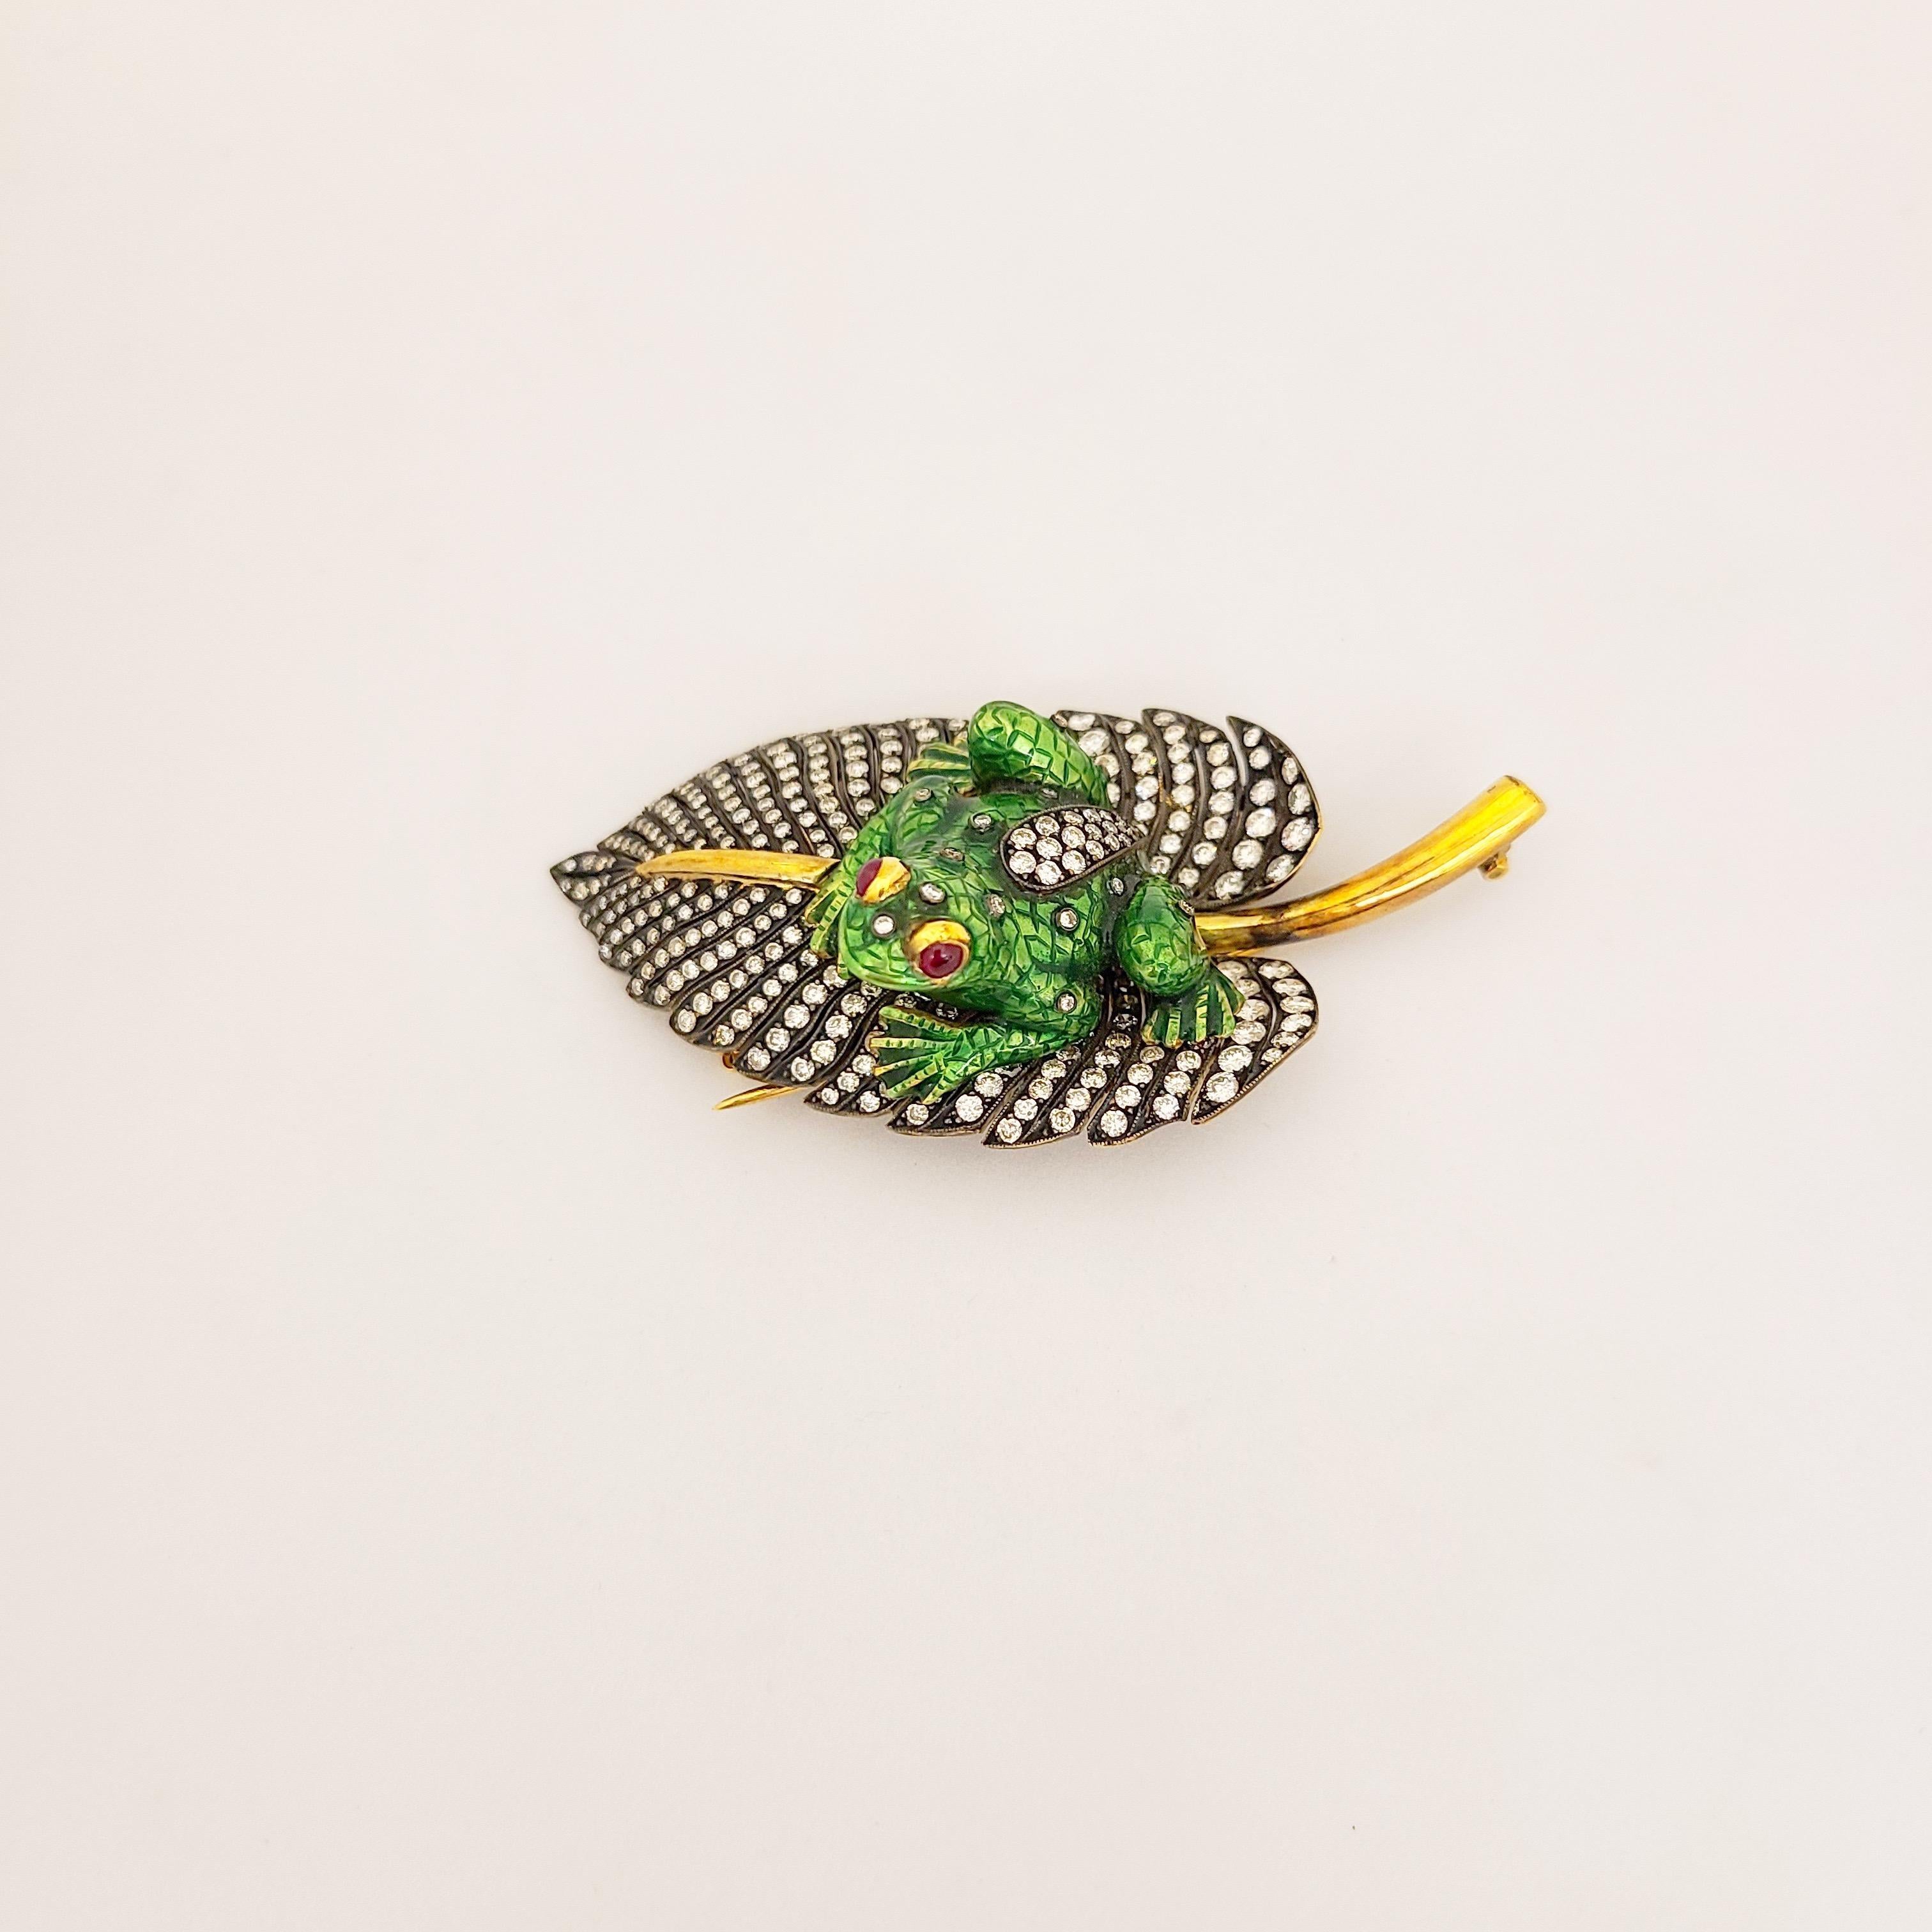 Contemporary Irlan 18 Karat Gold and Enamel Frog on a 5.65 Carat Diamond Lily Pad Brooch For Sale